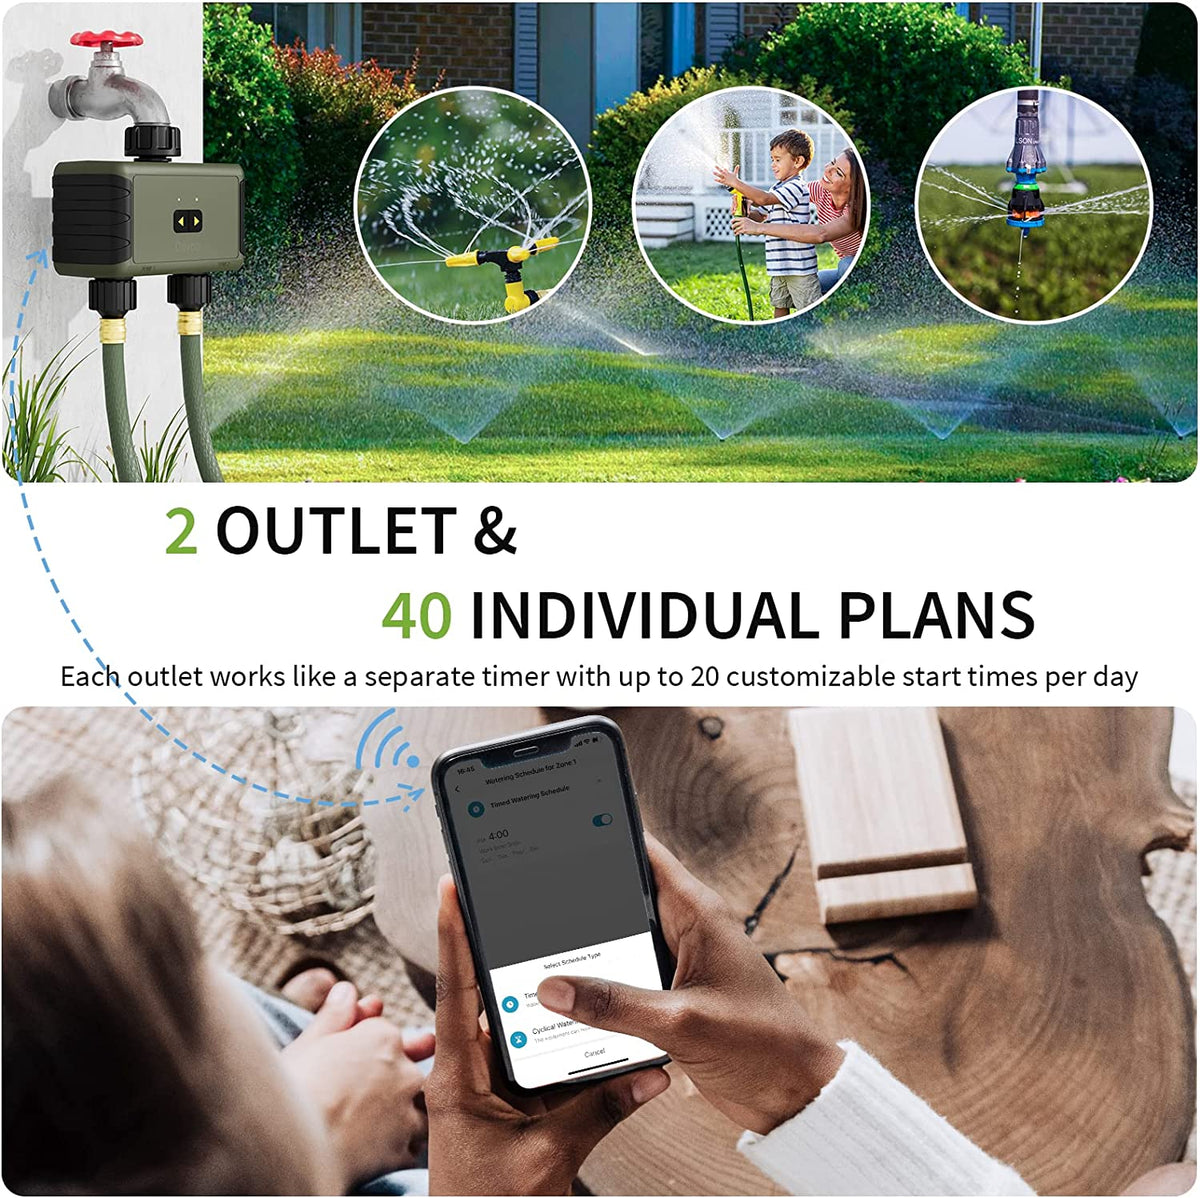 Outlet timer Smart with Wifi - cycle from 1 min to 24h